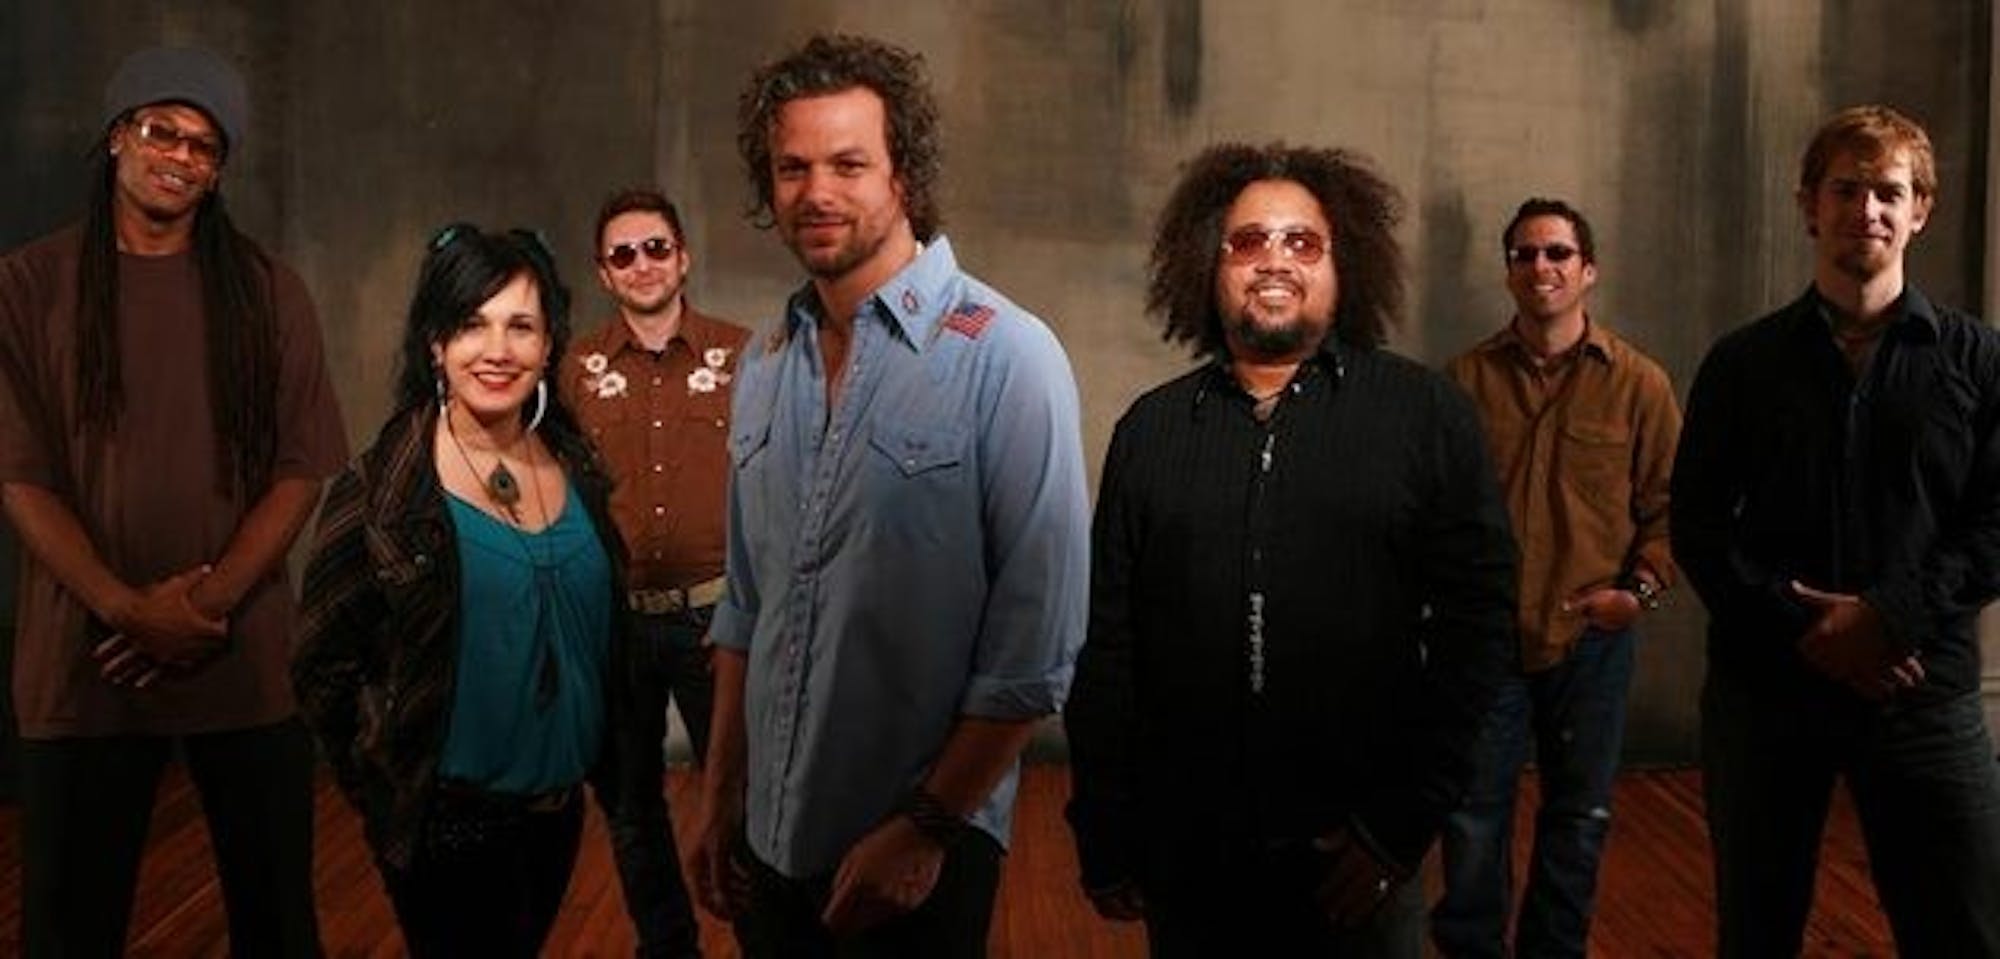 Pittsburgh-based rock band Rusted Root will perform at the Hopkins Center for the Arts on Thursday.